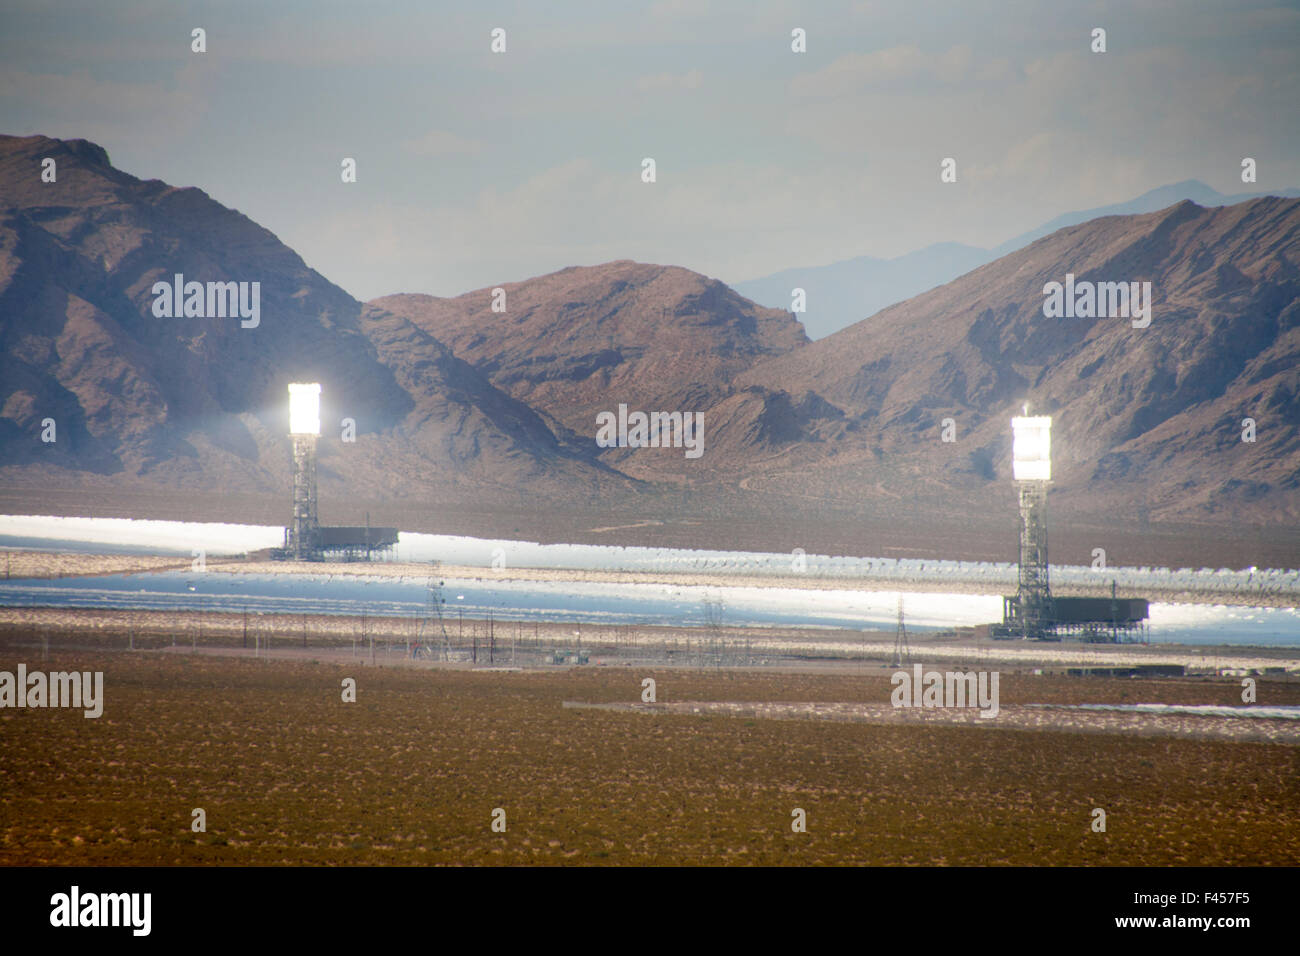 The Ivanpah Solar Electric Generating System is a concentrated solar thermal plant in the California Mojave Desert with a gross capacity of 392 megawatts. It deploys 173,500 heliostats focusing solar energy on boilers in centralized solar power towers. Stock Photo